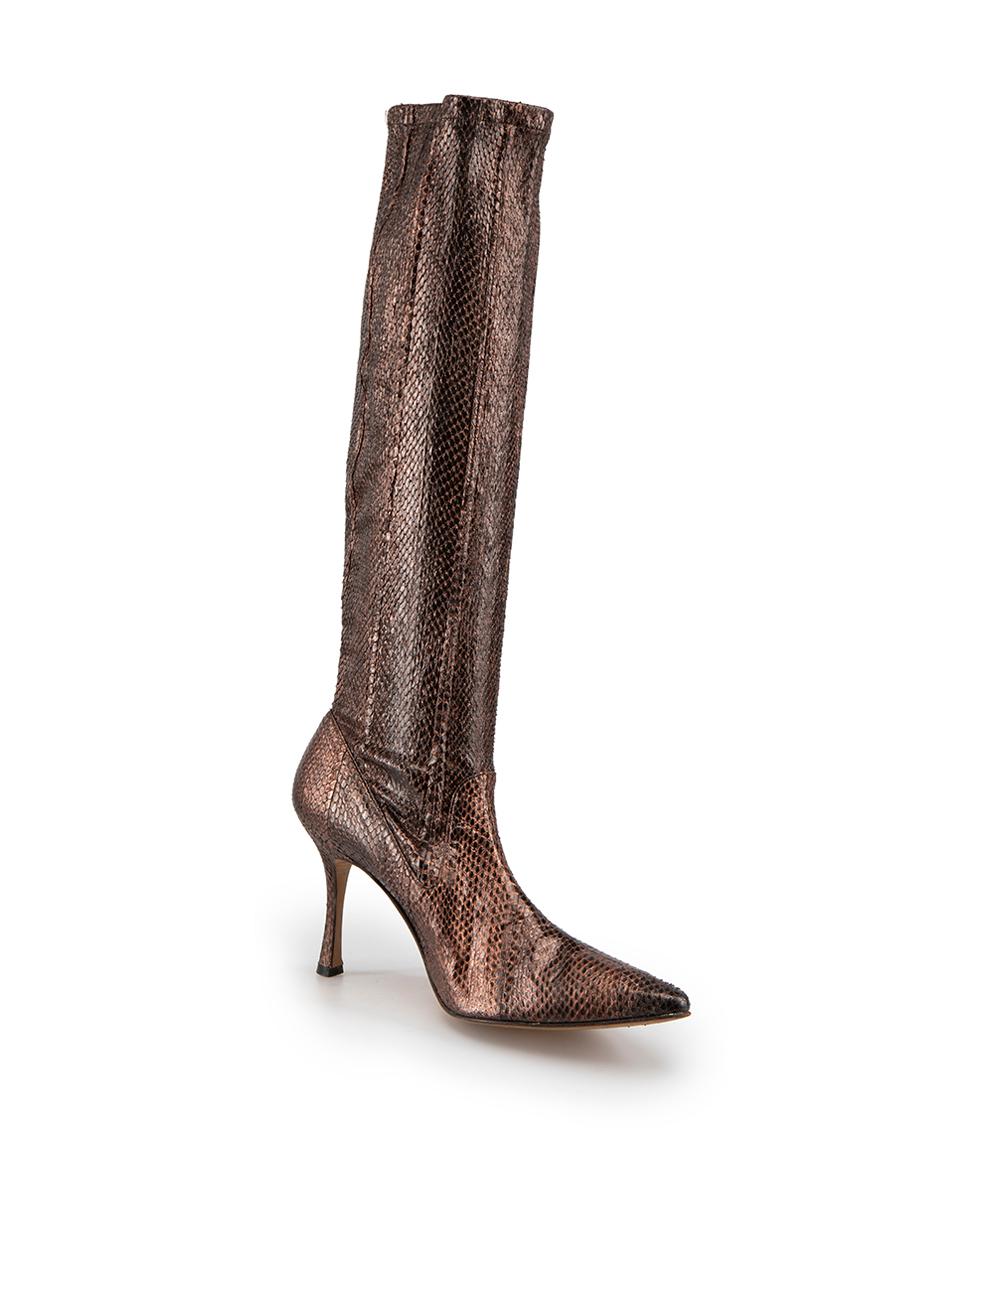 CONDITION is Very good. Minimal wear to boots is evident. Minimal wear to the texture with drying of the snakeskin on this used Manolo Blahnik designer resale item.

Details 
Brown metallic
Snakeskin
Knee high boots
Point toe
Slip on
High